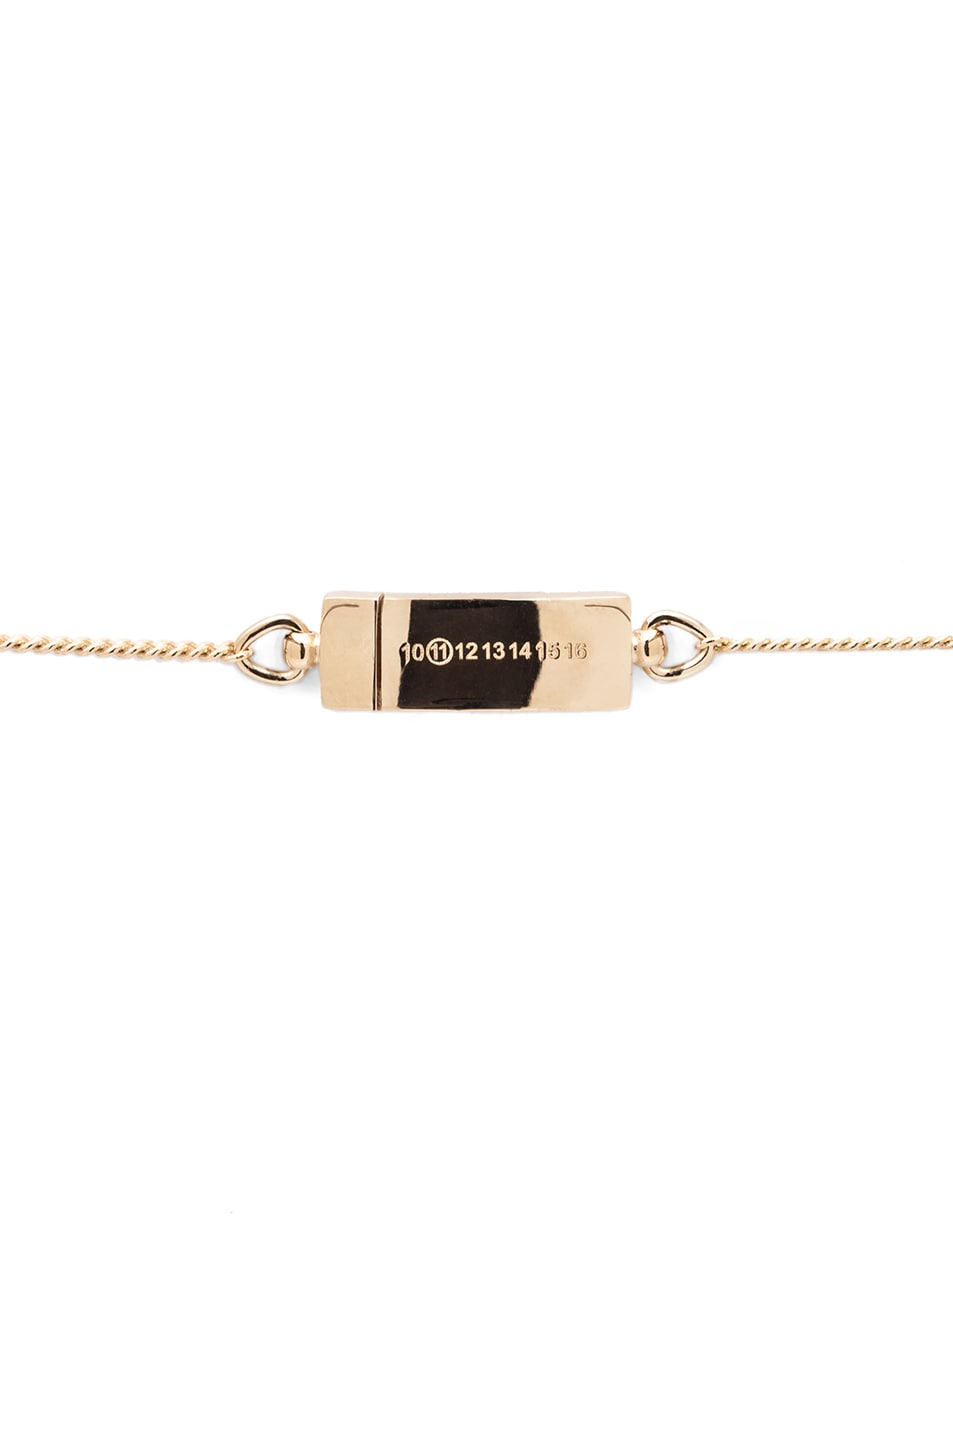 Maison Margiela Silver and Glass Necklace in Gold | FWRD